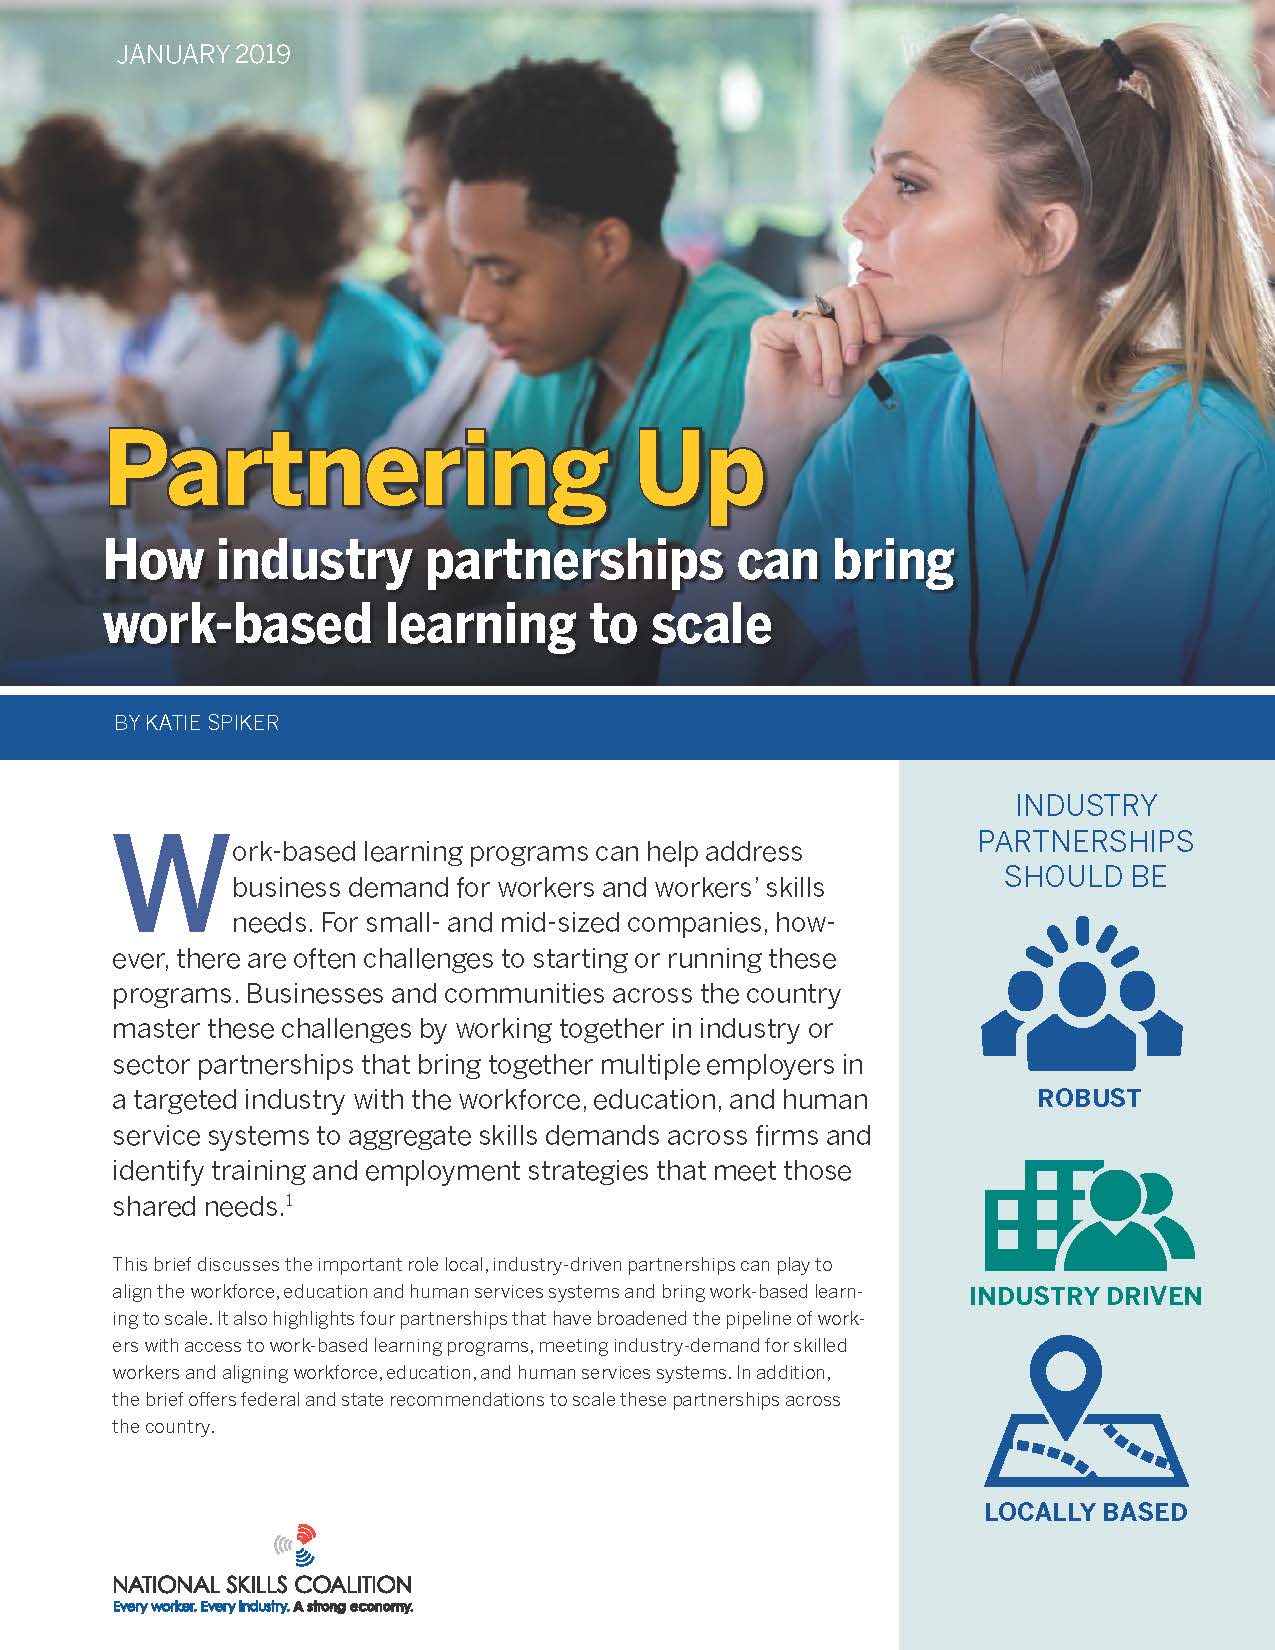 Local, industry-driven partnerships critical to expanding work-based learning in the U.S.